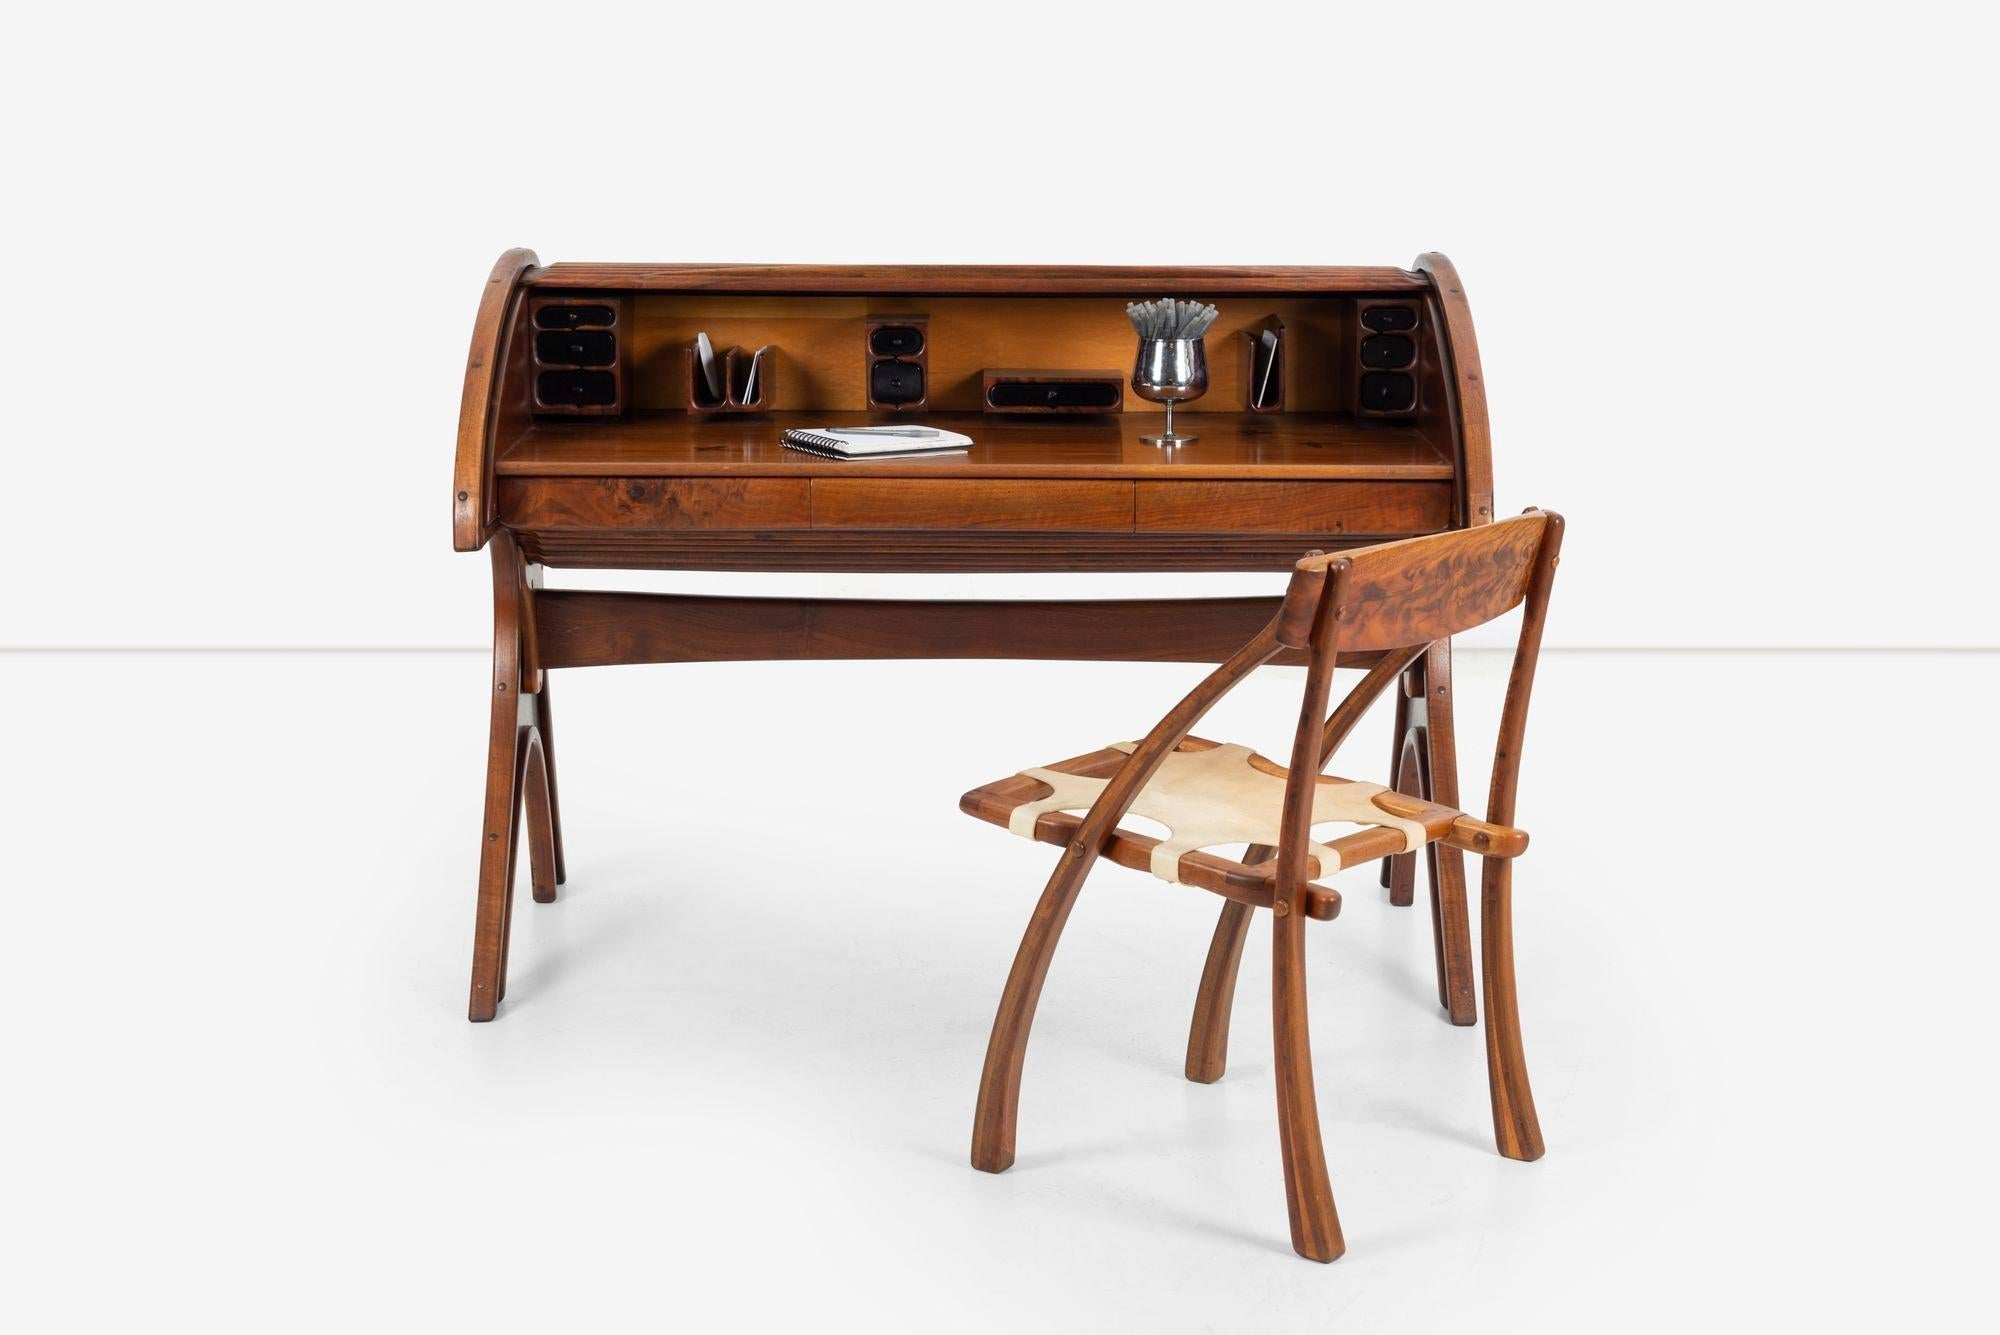 Arthur Espenet Carpenter Roll-Top Desk 1979, in American black walnut. Features:Inlay rosewood butterflies.
Three pencil drawers lined in felt. Multiple drawer and puzzle storage boxes, most felt lined, letter holders.
Under height: 26